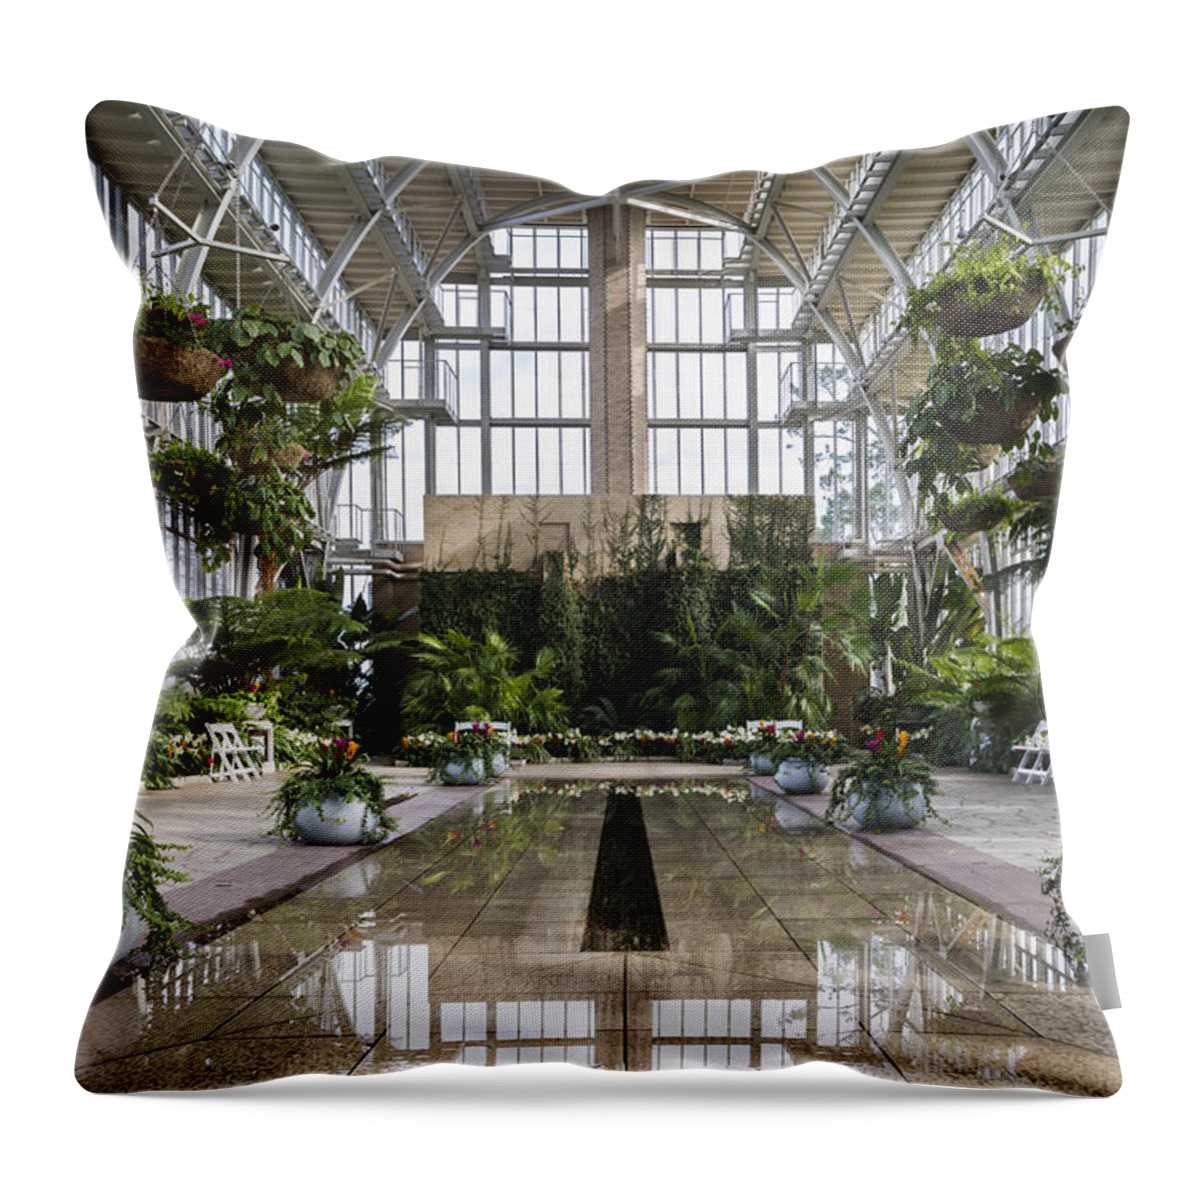 Fountain Throw Pillow featuring the photograph The Jewel Box by Andrea Silies